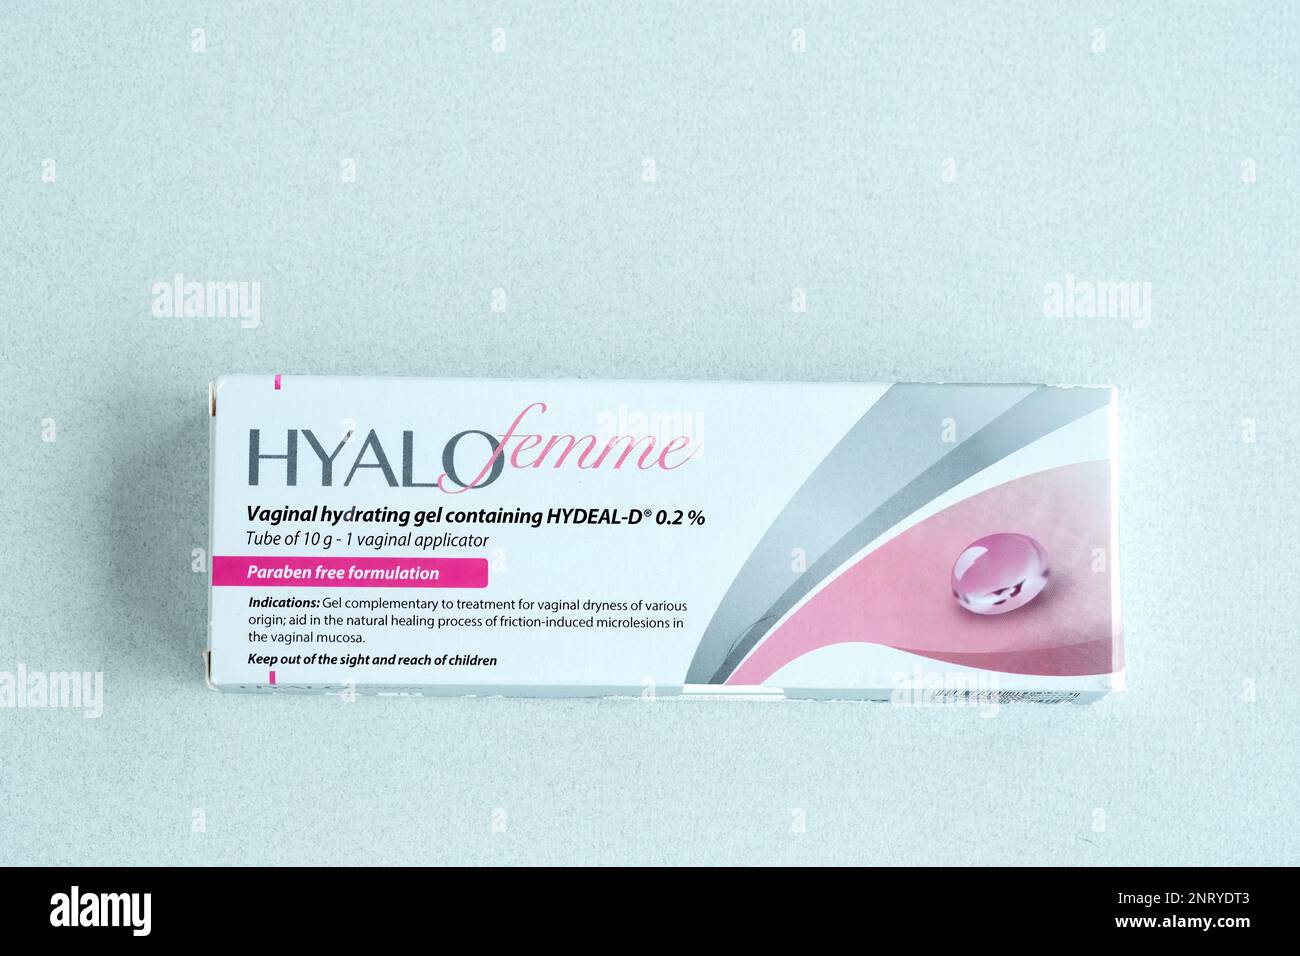 A box containing hyalofemme medication Its use is prescribed for oestrogen deficiency for treatment of the vaginal to relieve symptoms such as dryness Stock Photo